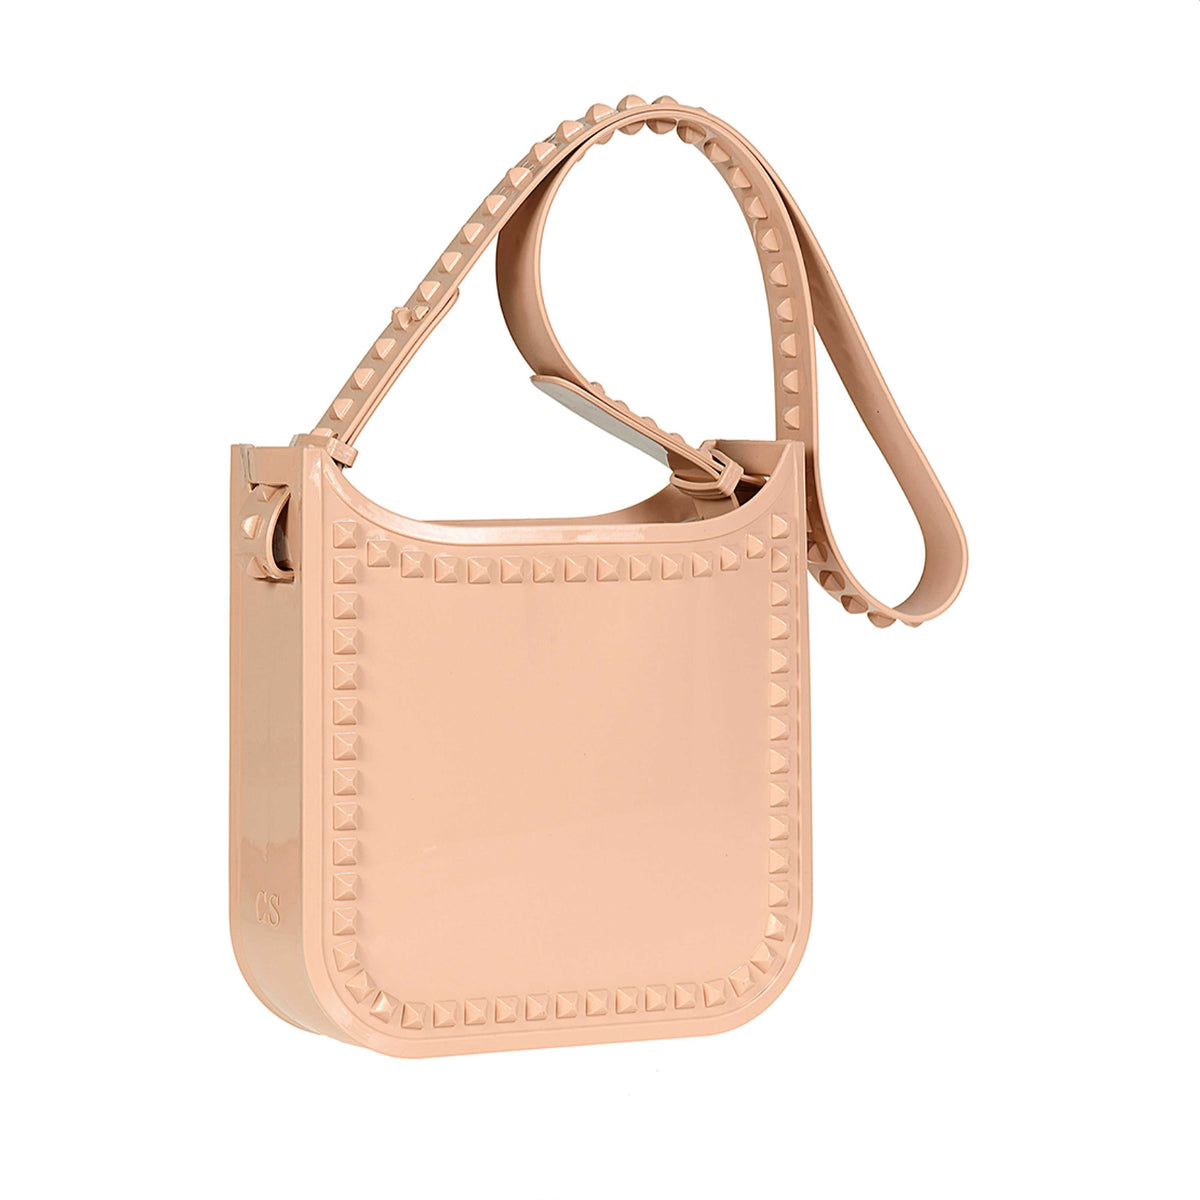 Toni rubber beach bag which is handsfree in color blush